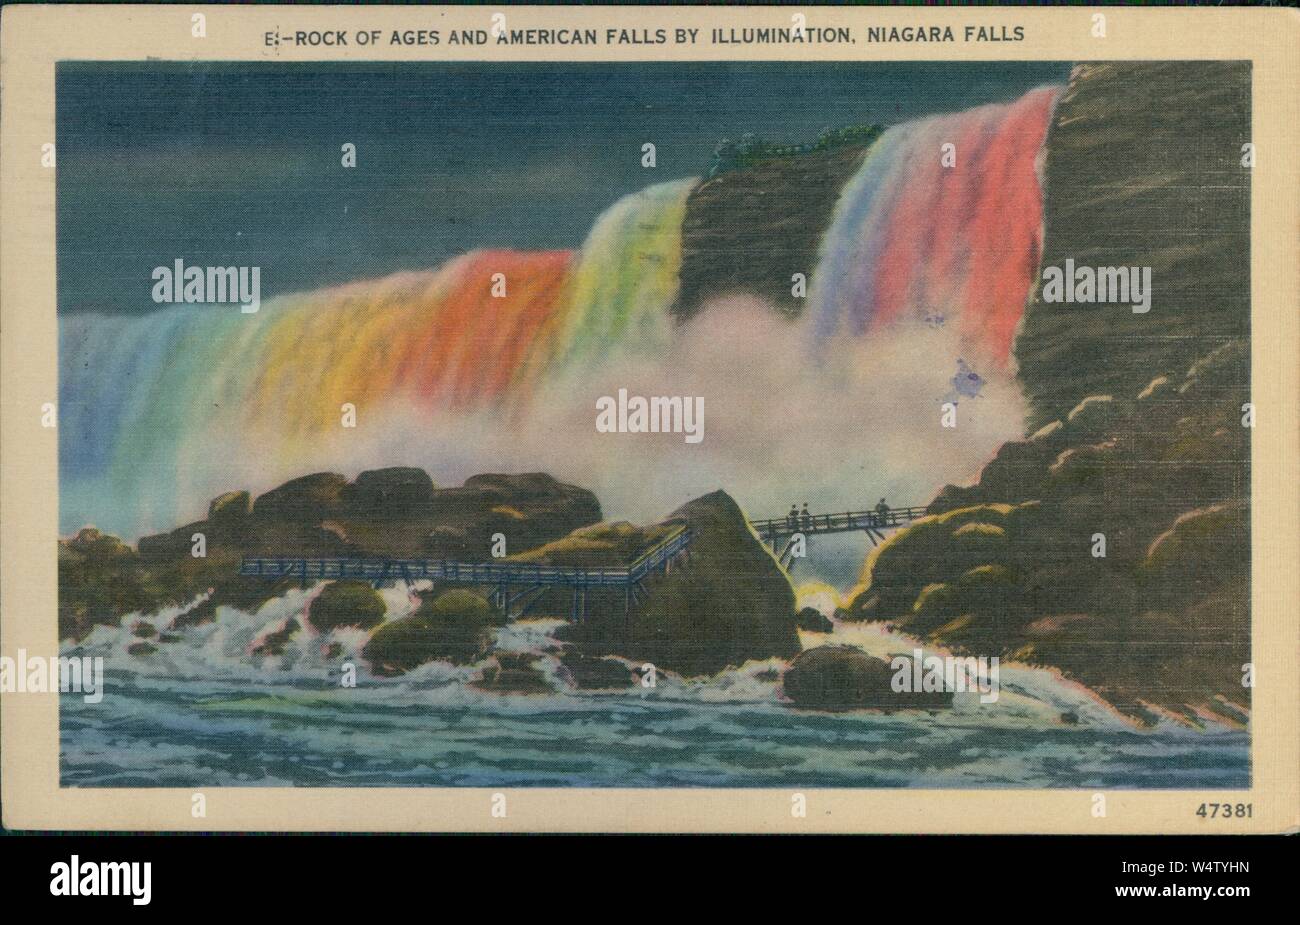 Vintage postcard reproduction of the Rock of Ages and American Falls by illumination, Niagara Falls, between the Canadian province of Ontario and the American state of New York, 1930. () Stock Photo